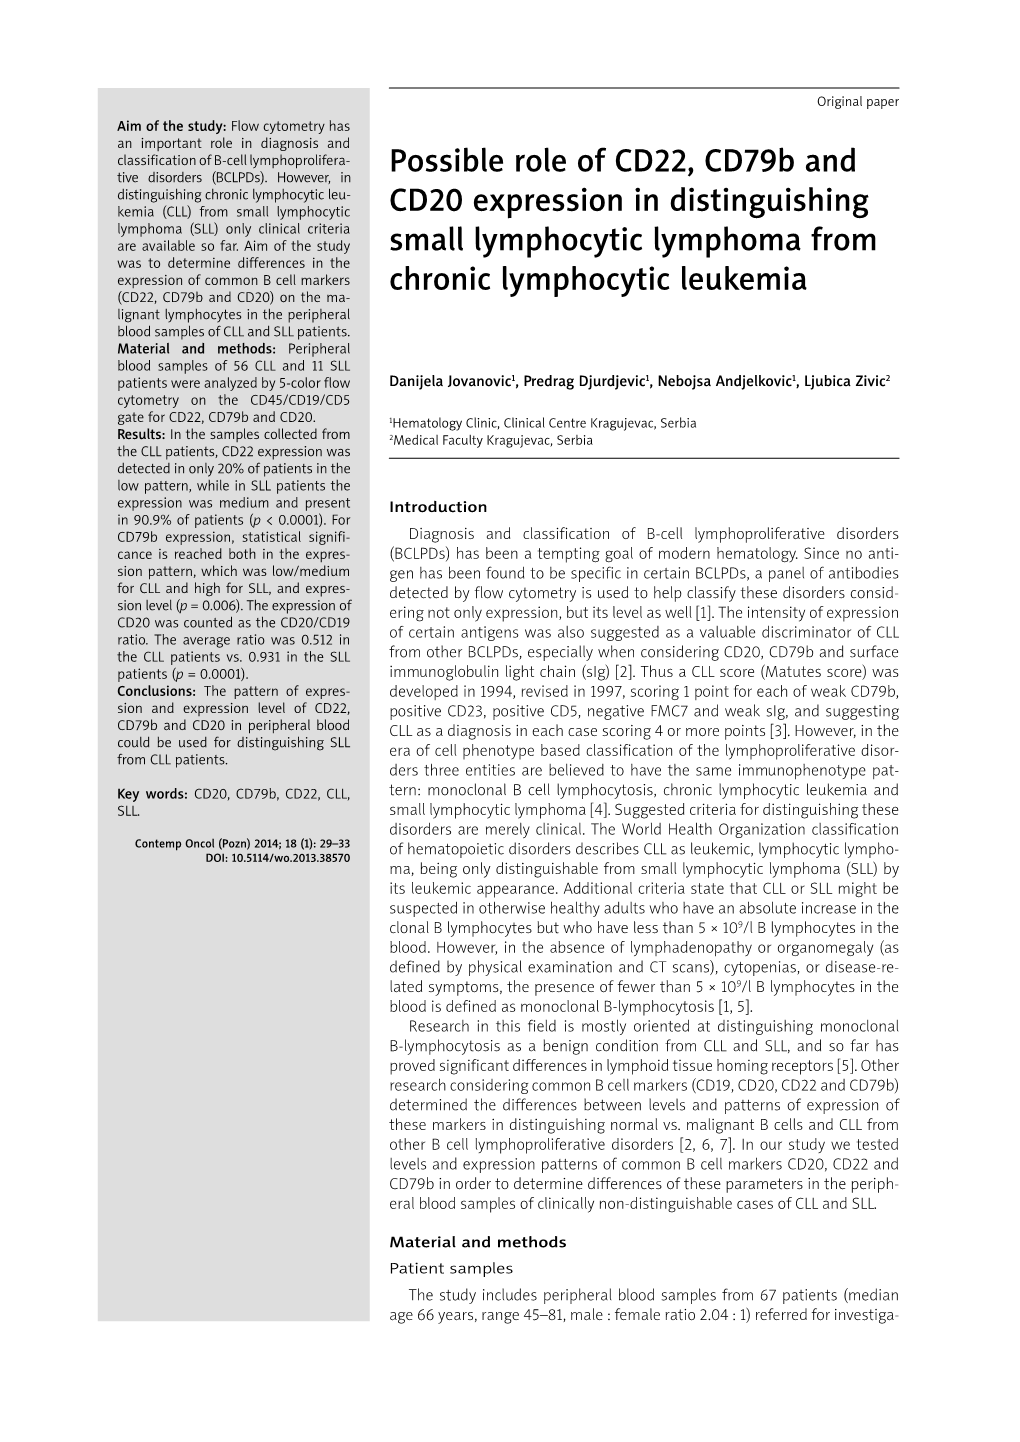 Possible Role of CD22, Cd79b and CD20 Expression in Distinguishing Small Lymphocytic Lymphoma from Chronic Lymphocytic Leukemia 31